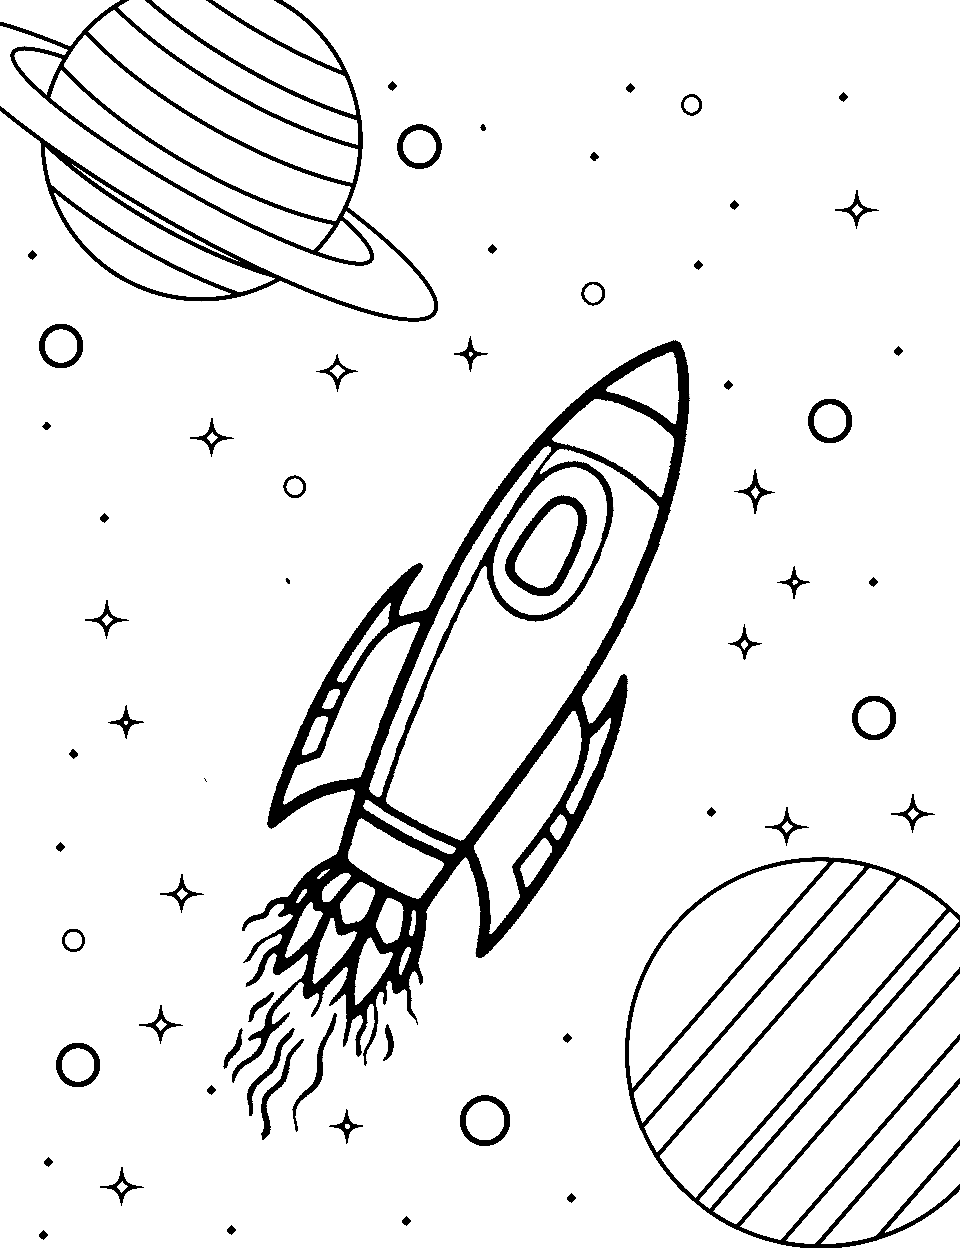 Spaceship's Starry Travel Coloring Page - A spaceship traveling amidst planets and stars.